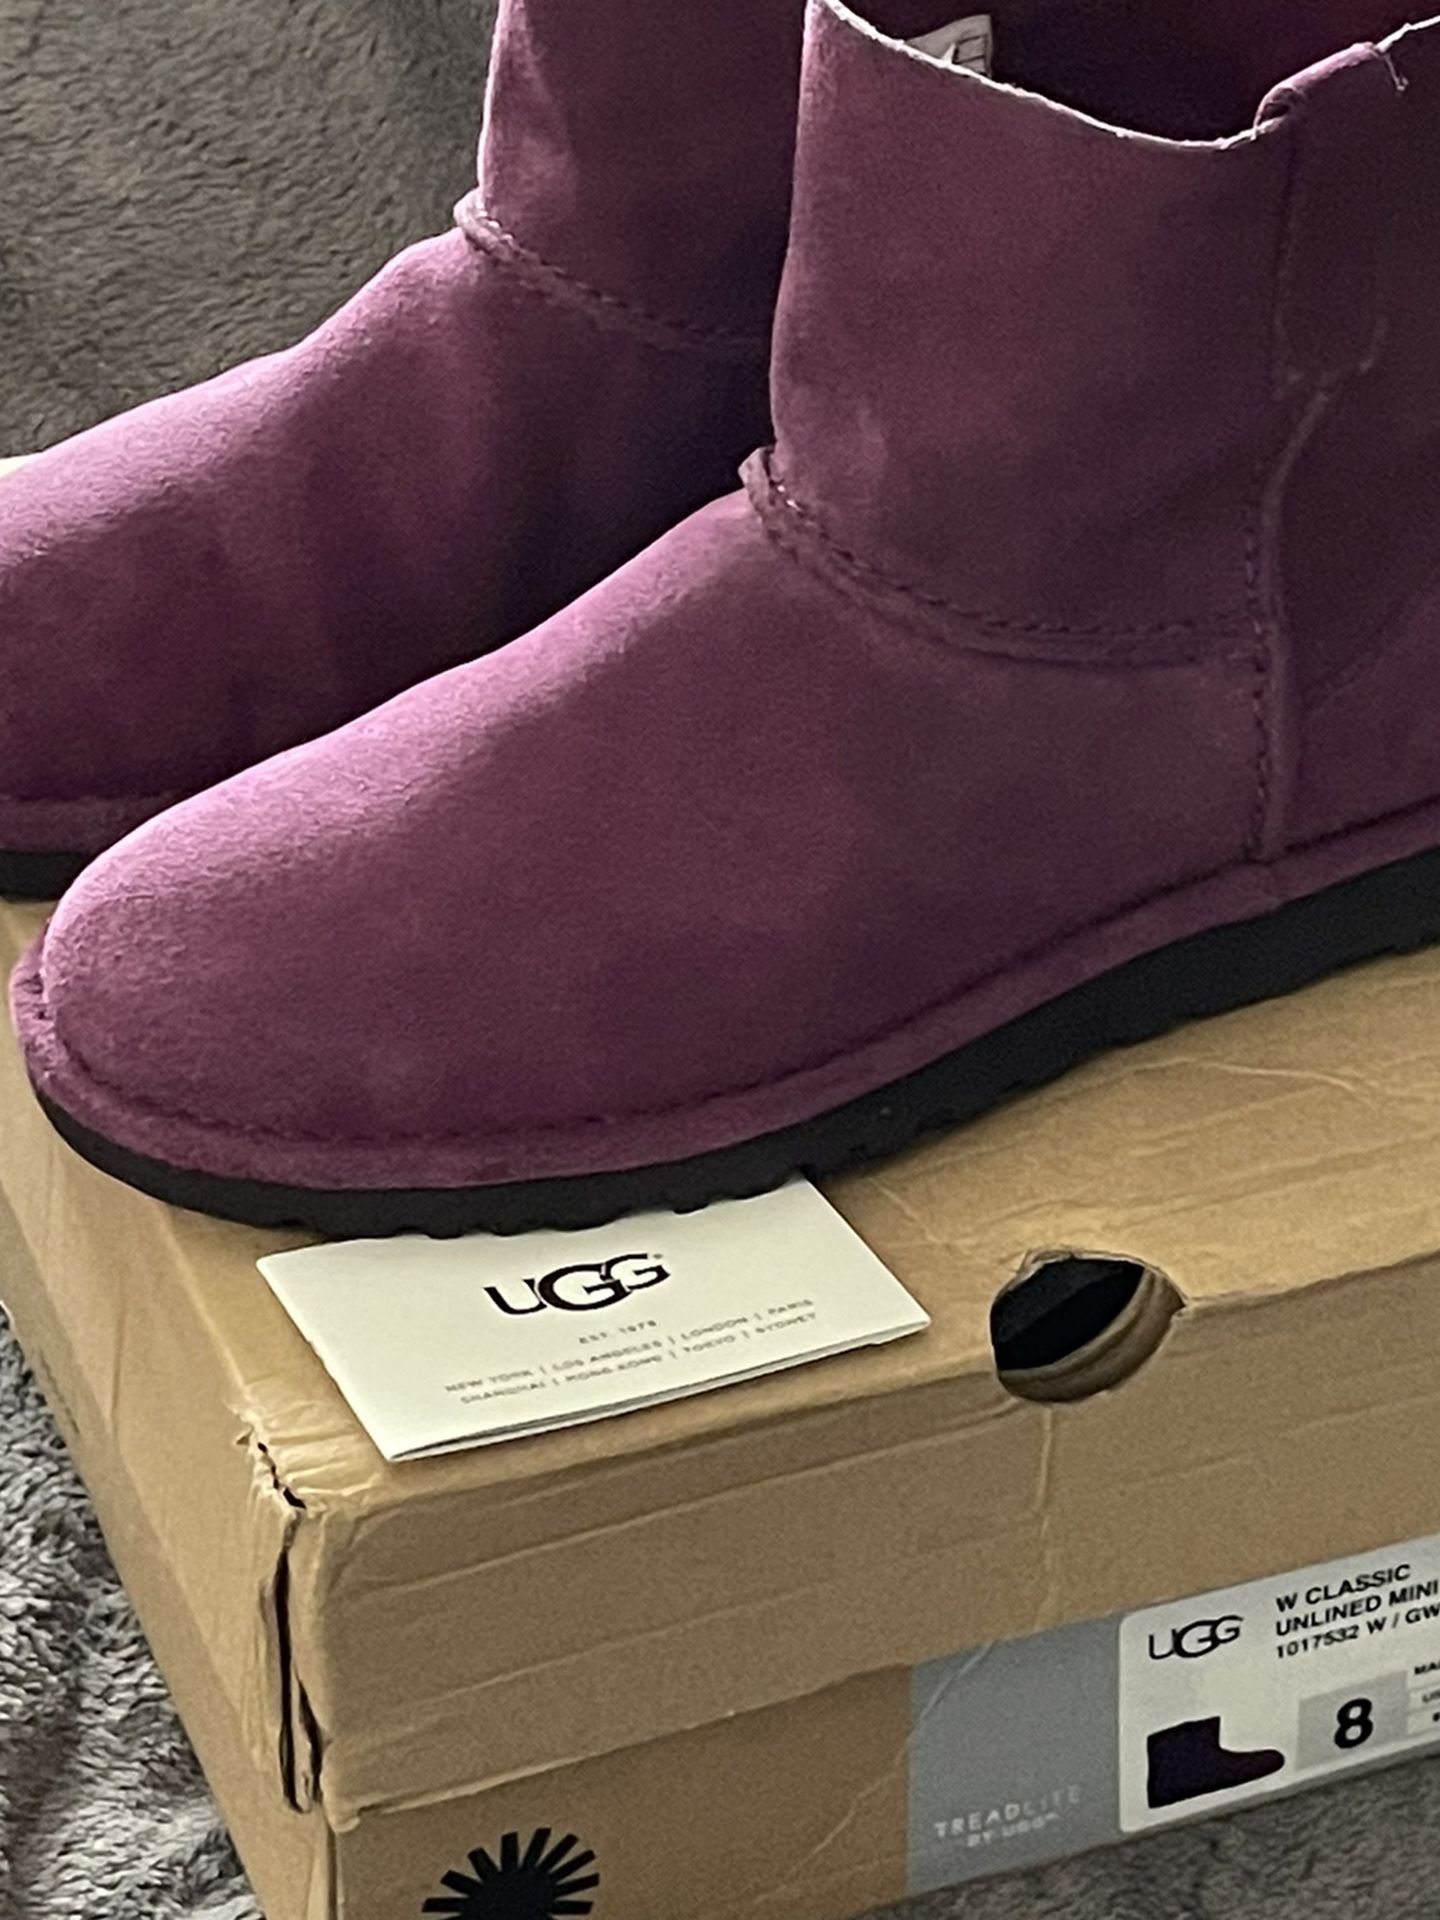 Ugg’s -authentic $75 Each One